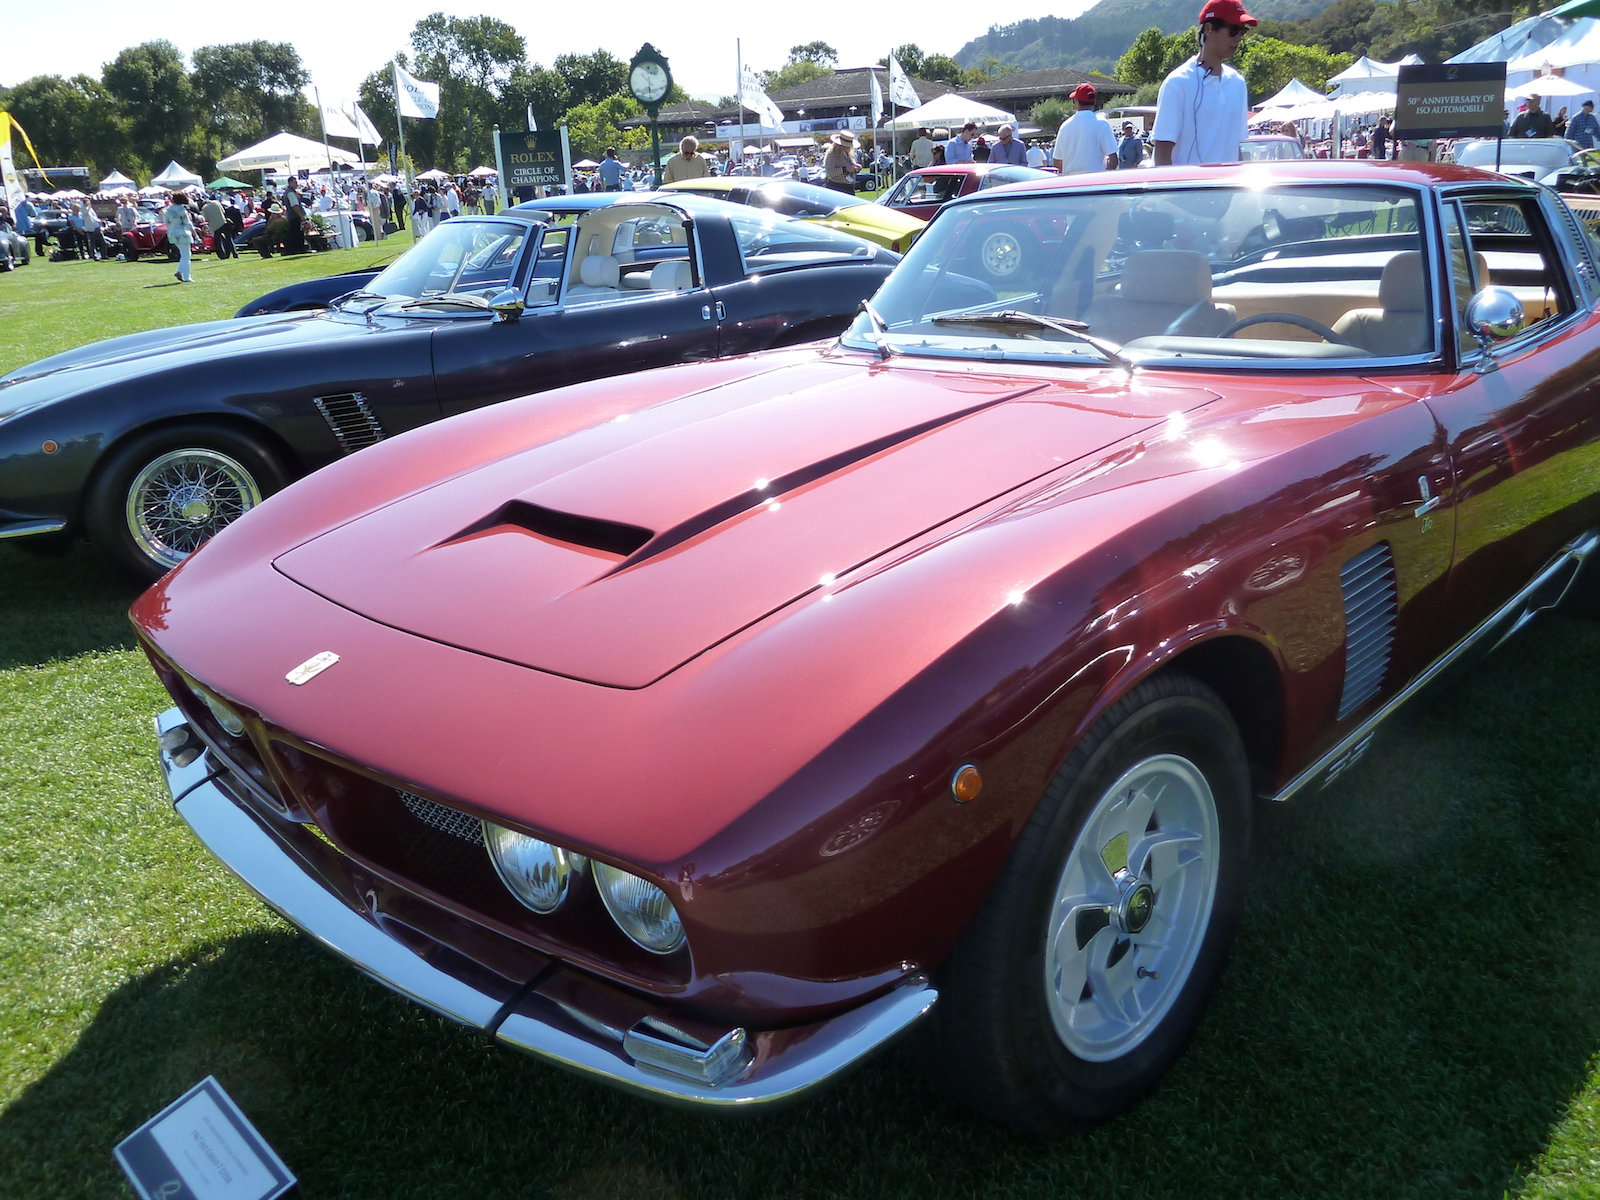 Iso Grifo No. 413 Is A Very Unusual Price Record Holder